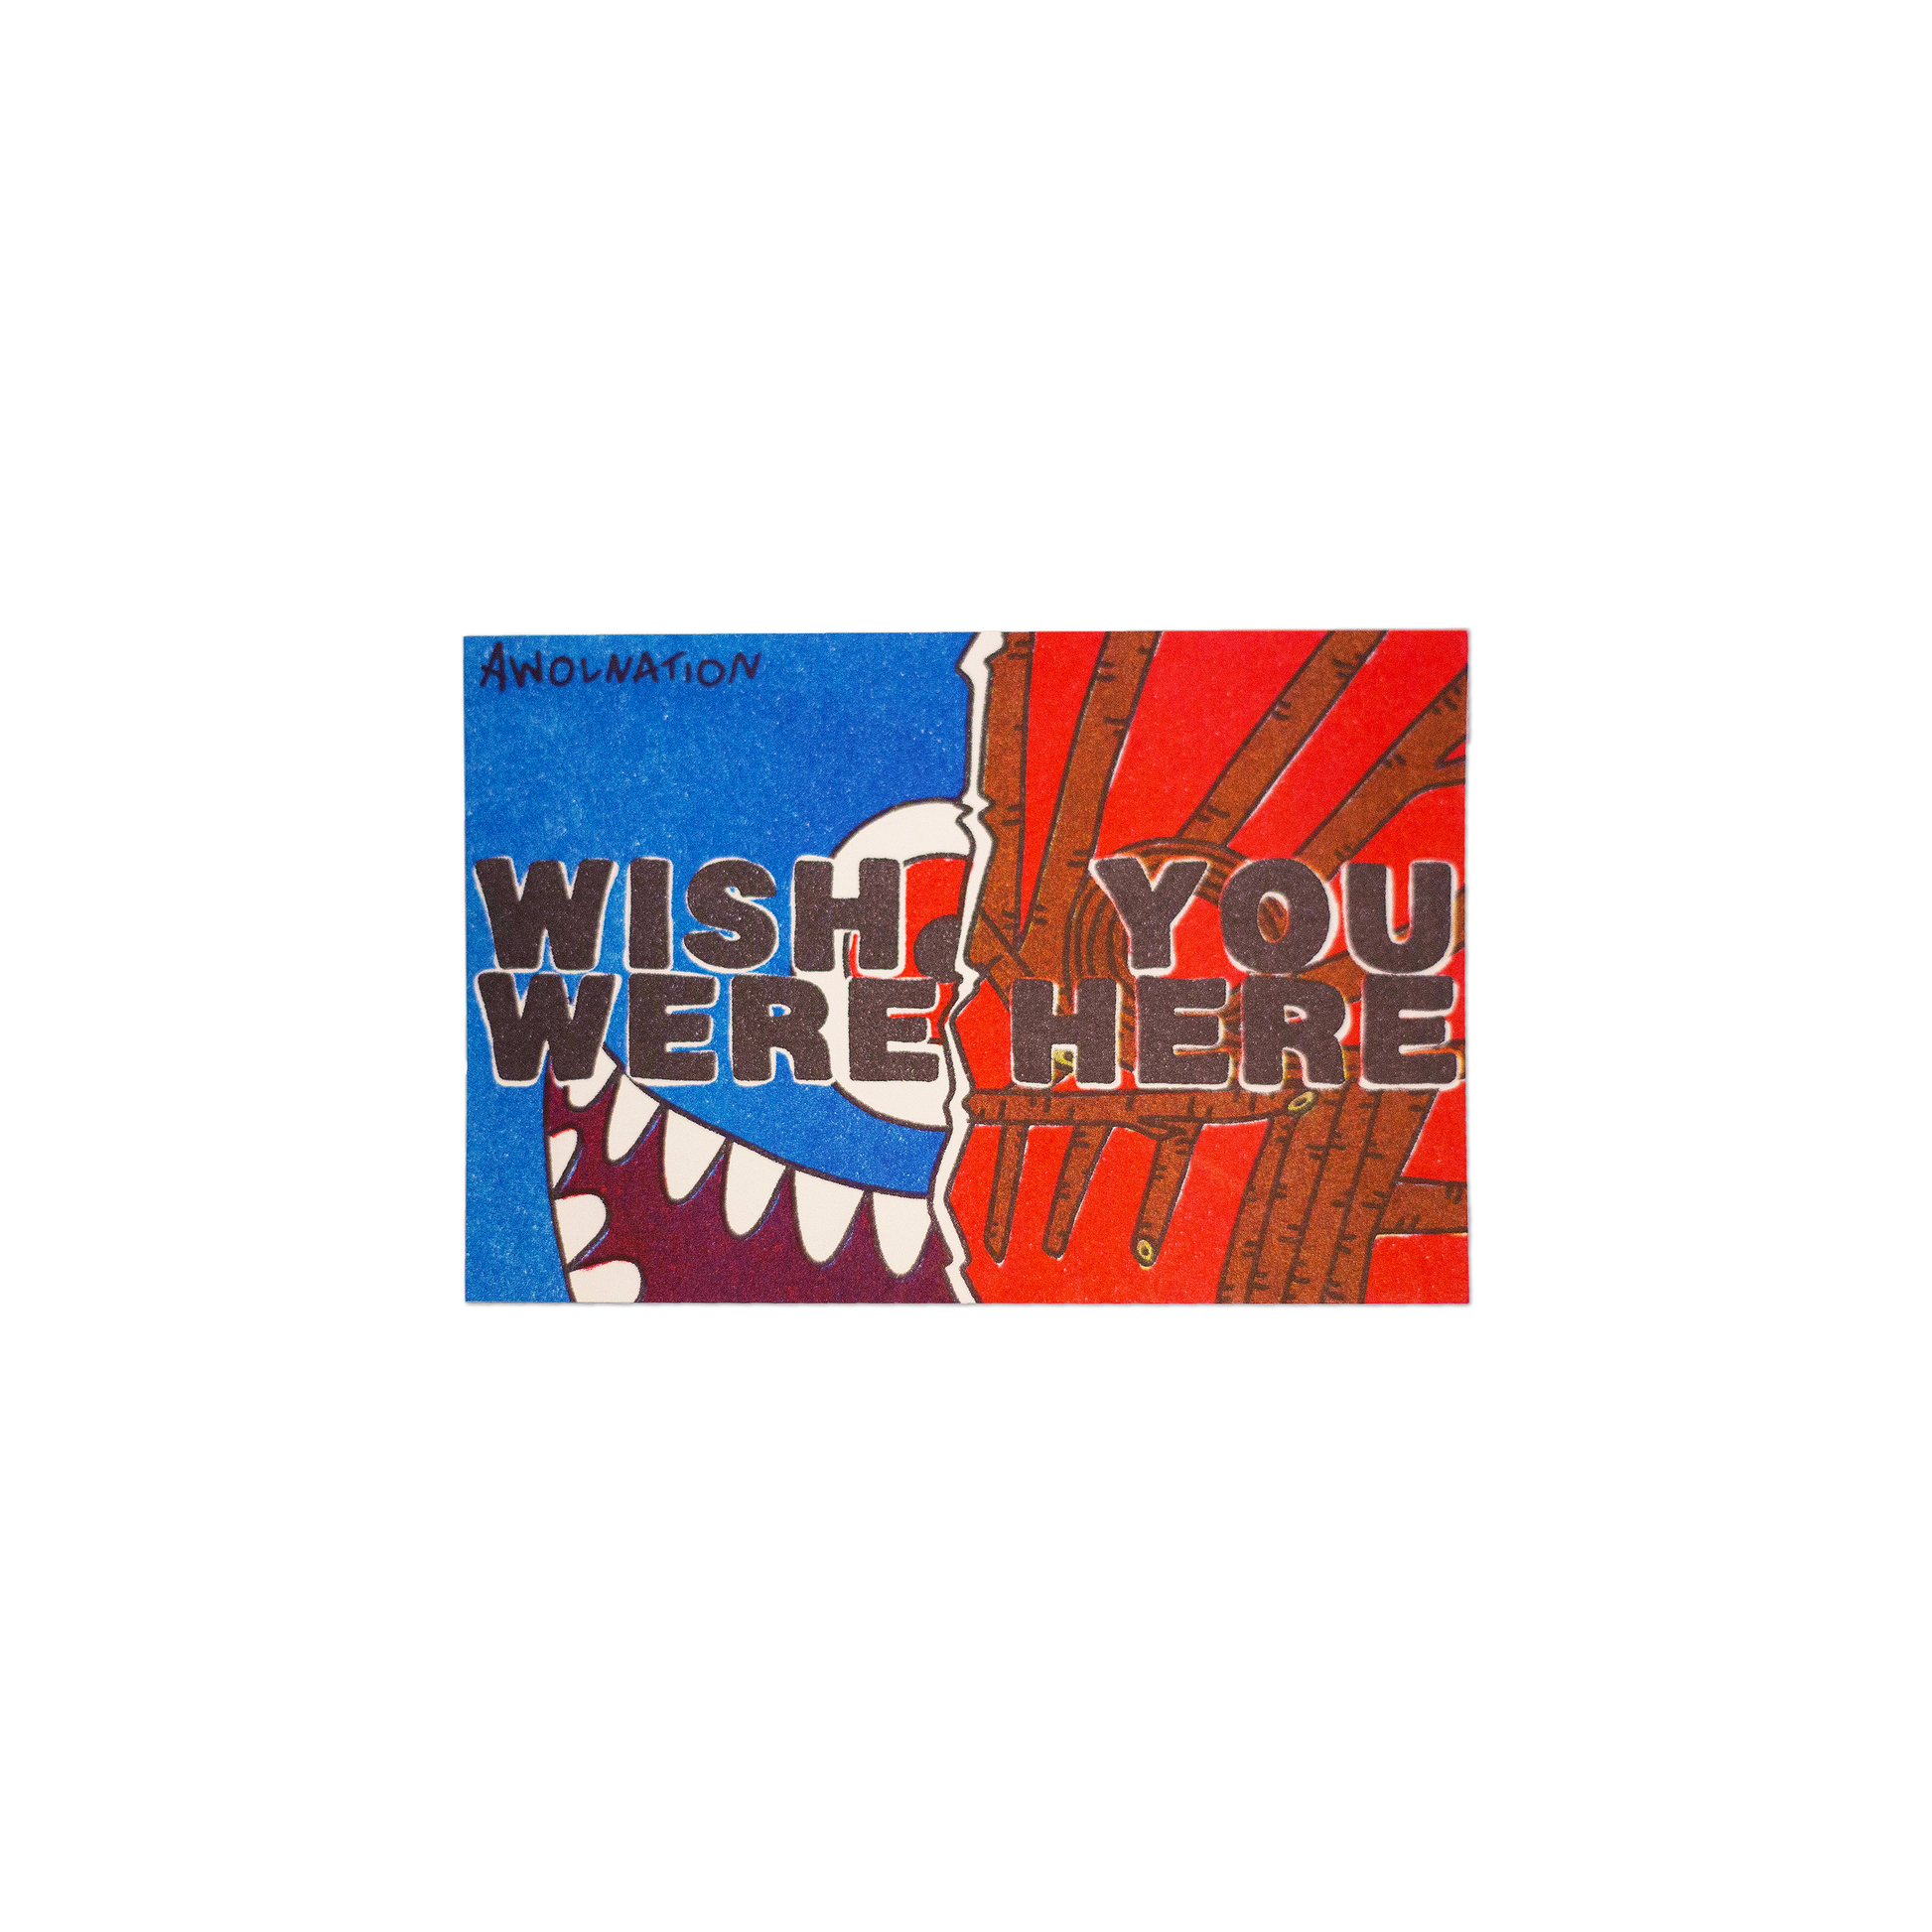 AWOLNATION Thank You For Listening Postcard Wish you were here